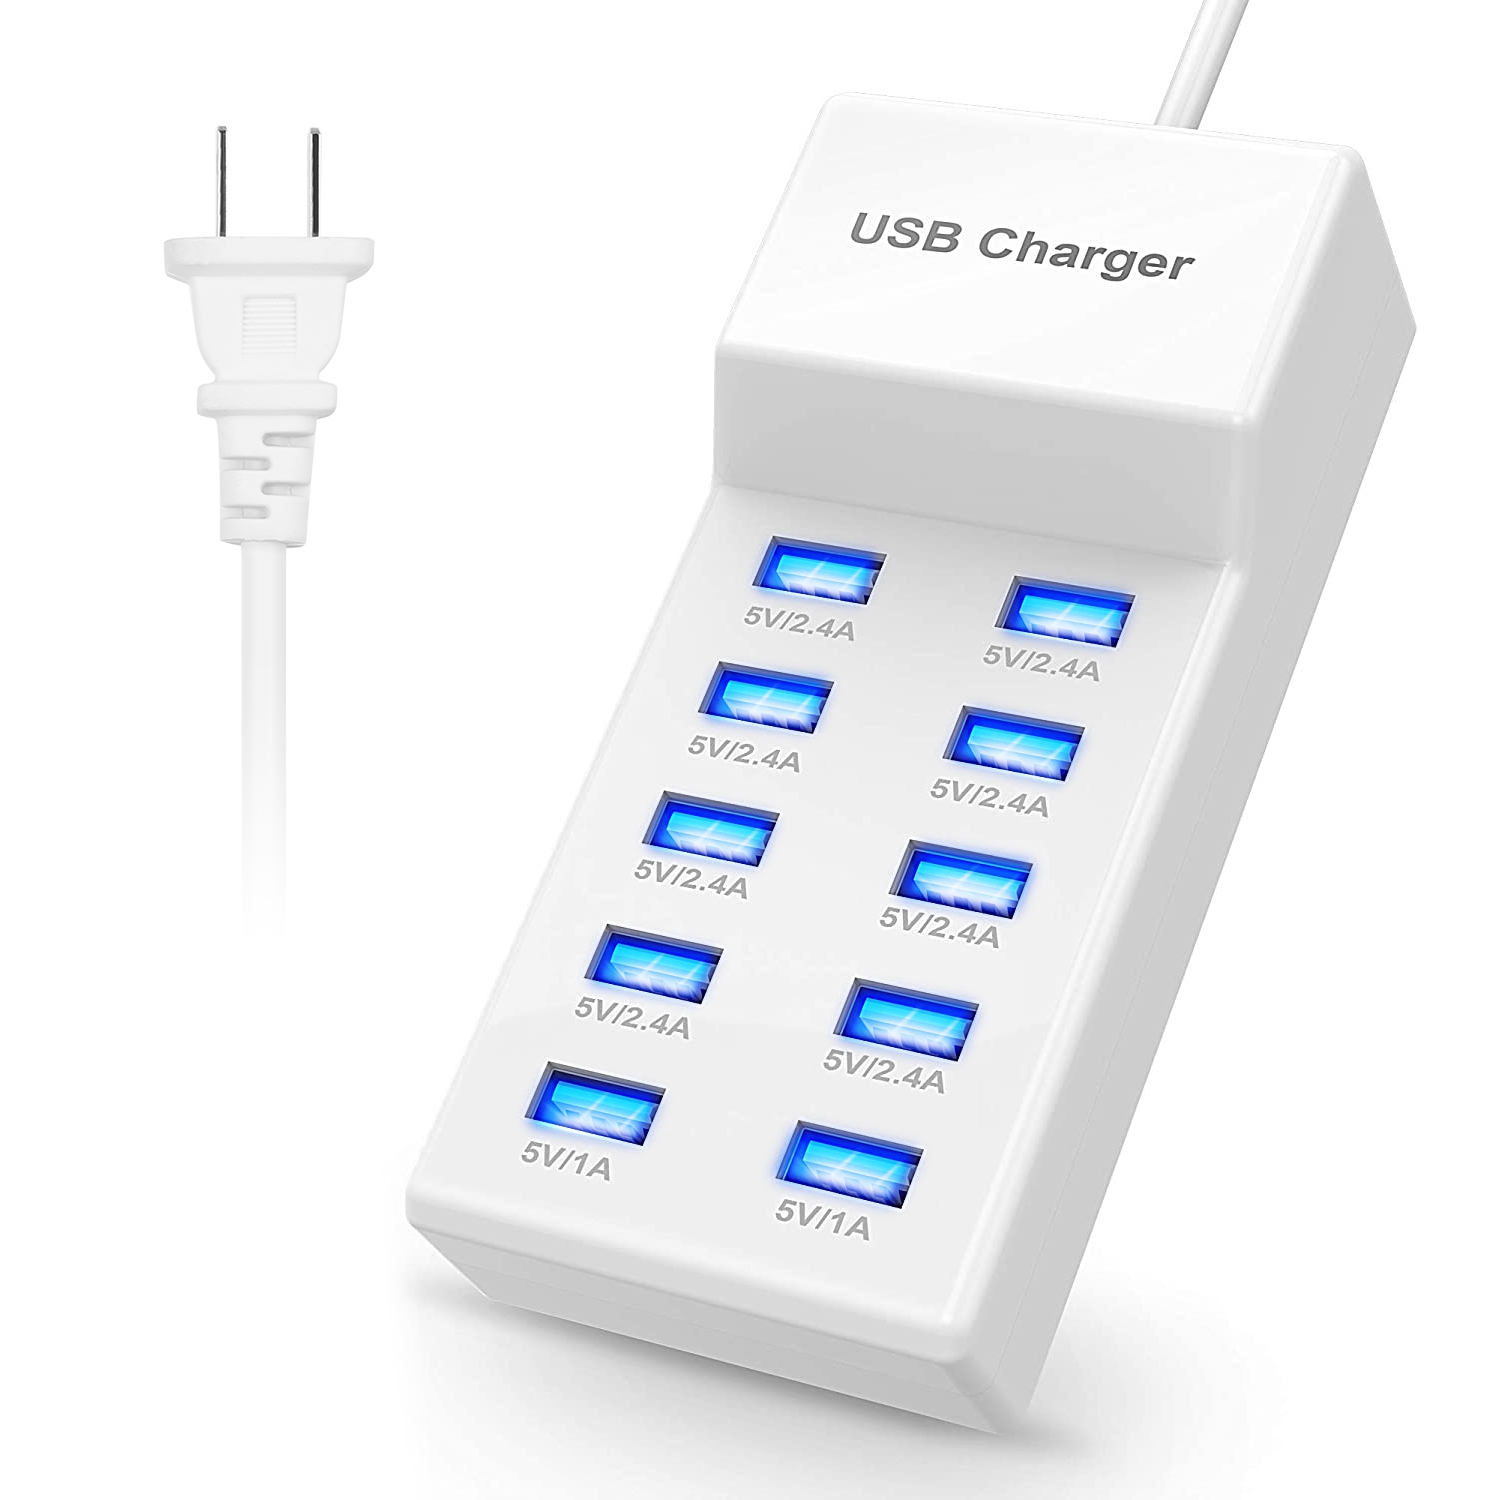 10 Ports USB Charging Station Hub 50W USB Wall Charger Fast Charging Power Adapter for Phone Tablet